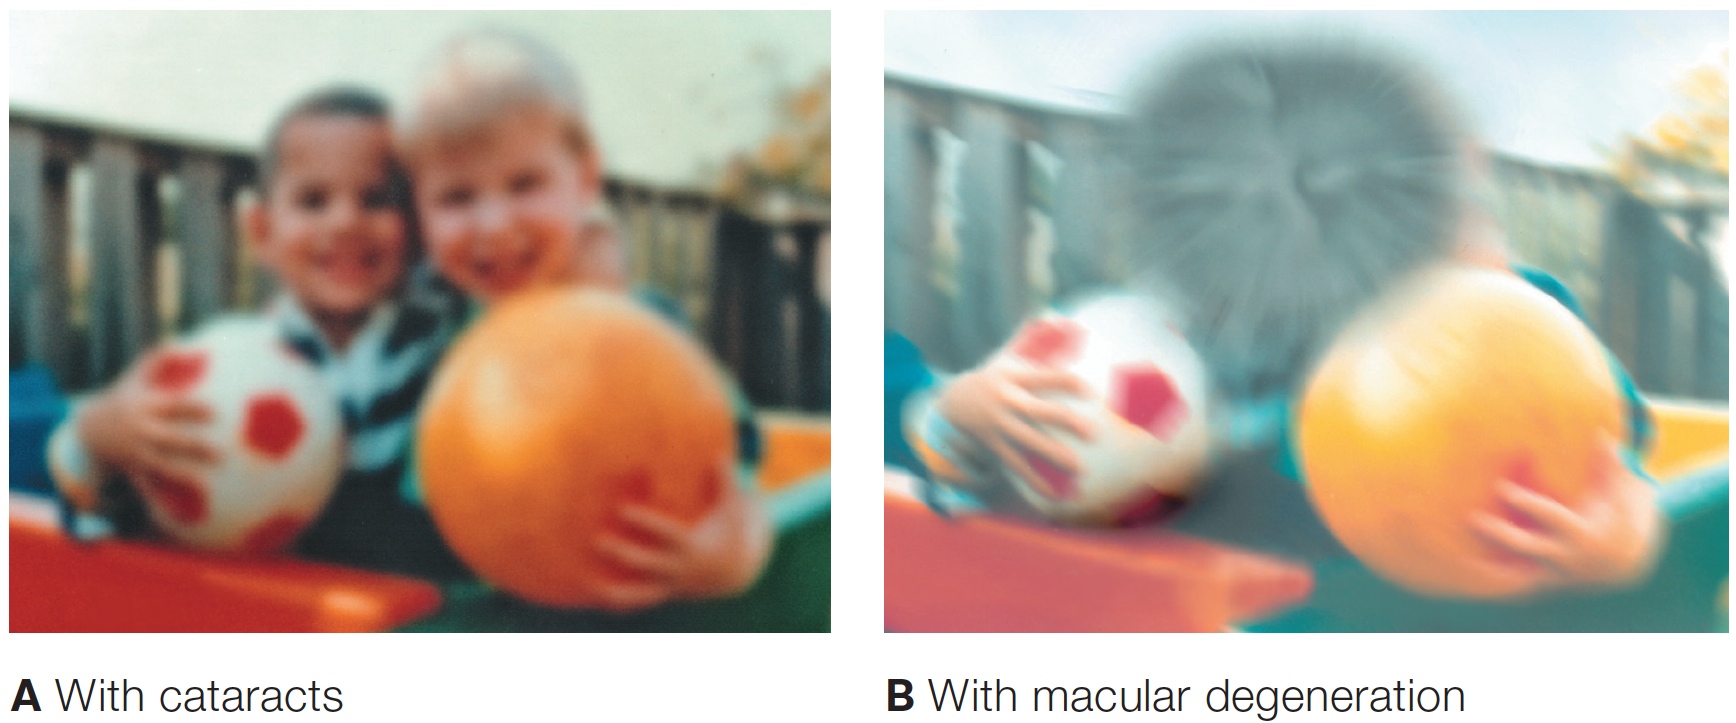 Photos simulating vision with two common visual disorders